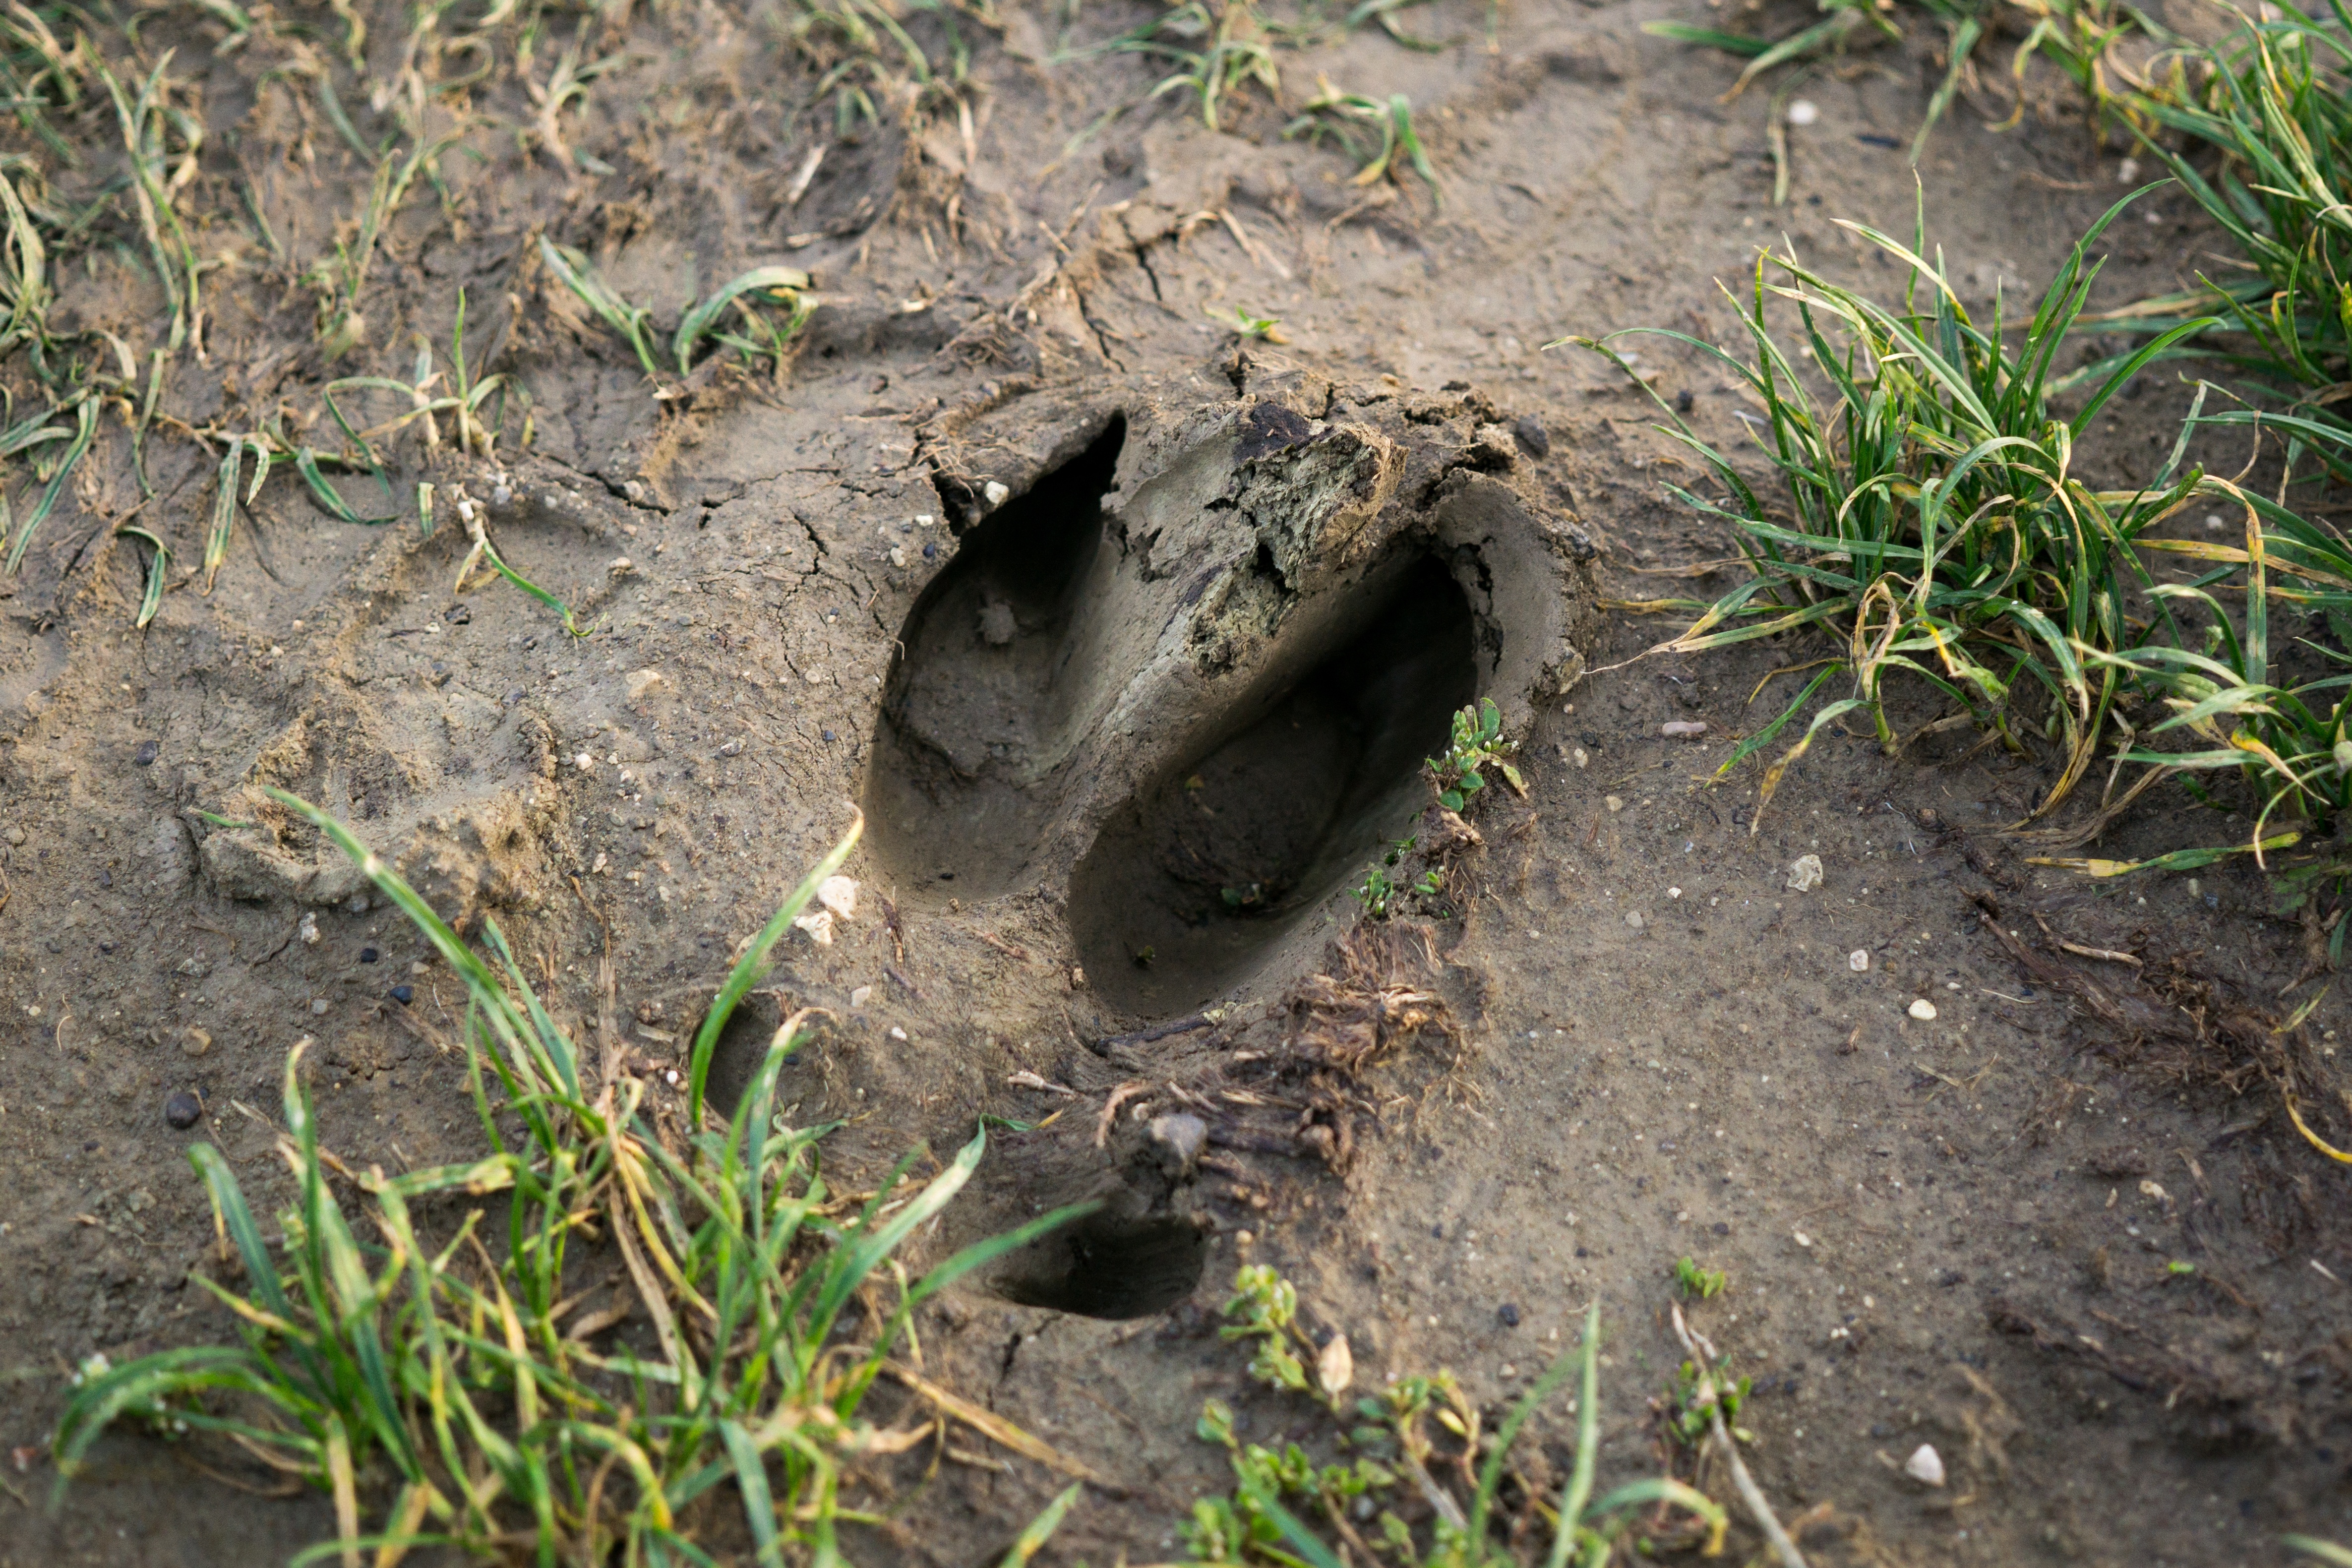 track from a feral pig in the mud